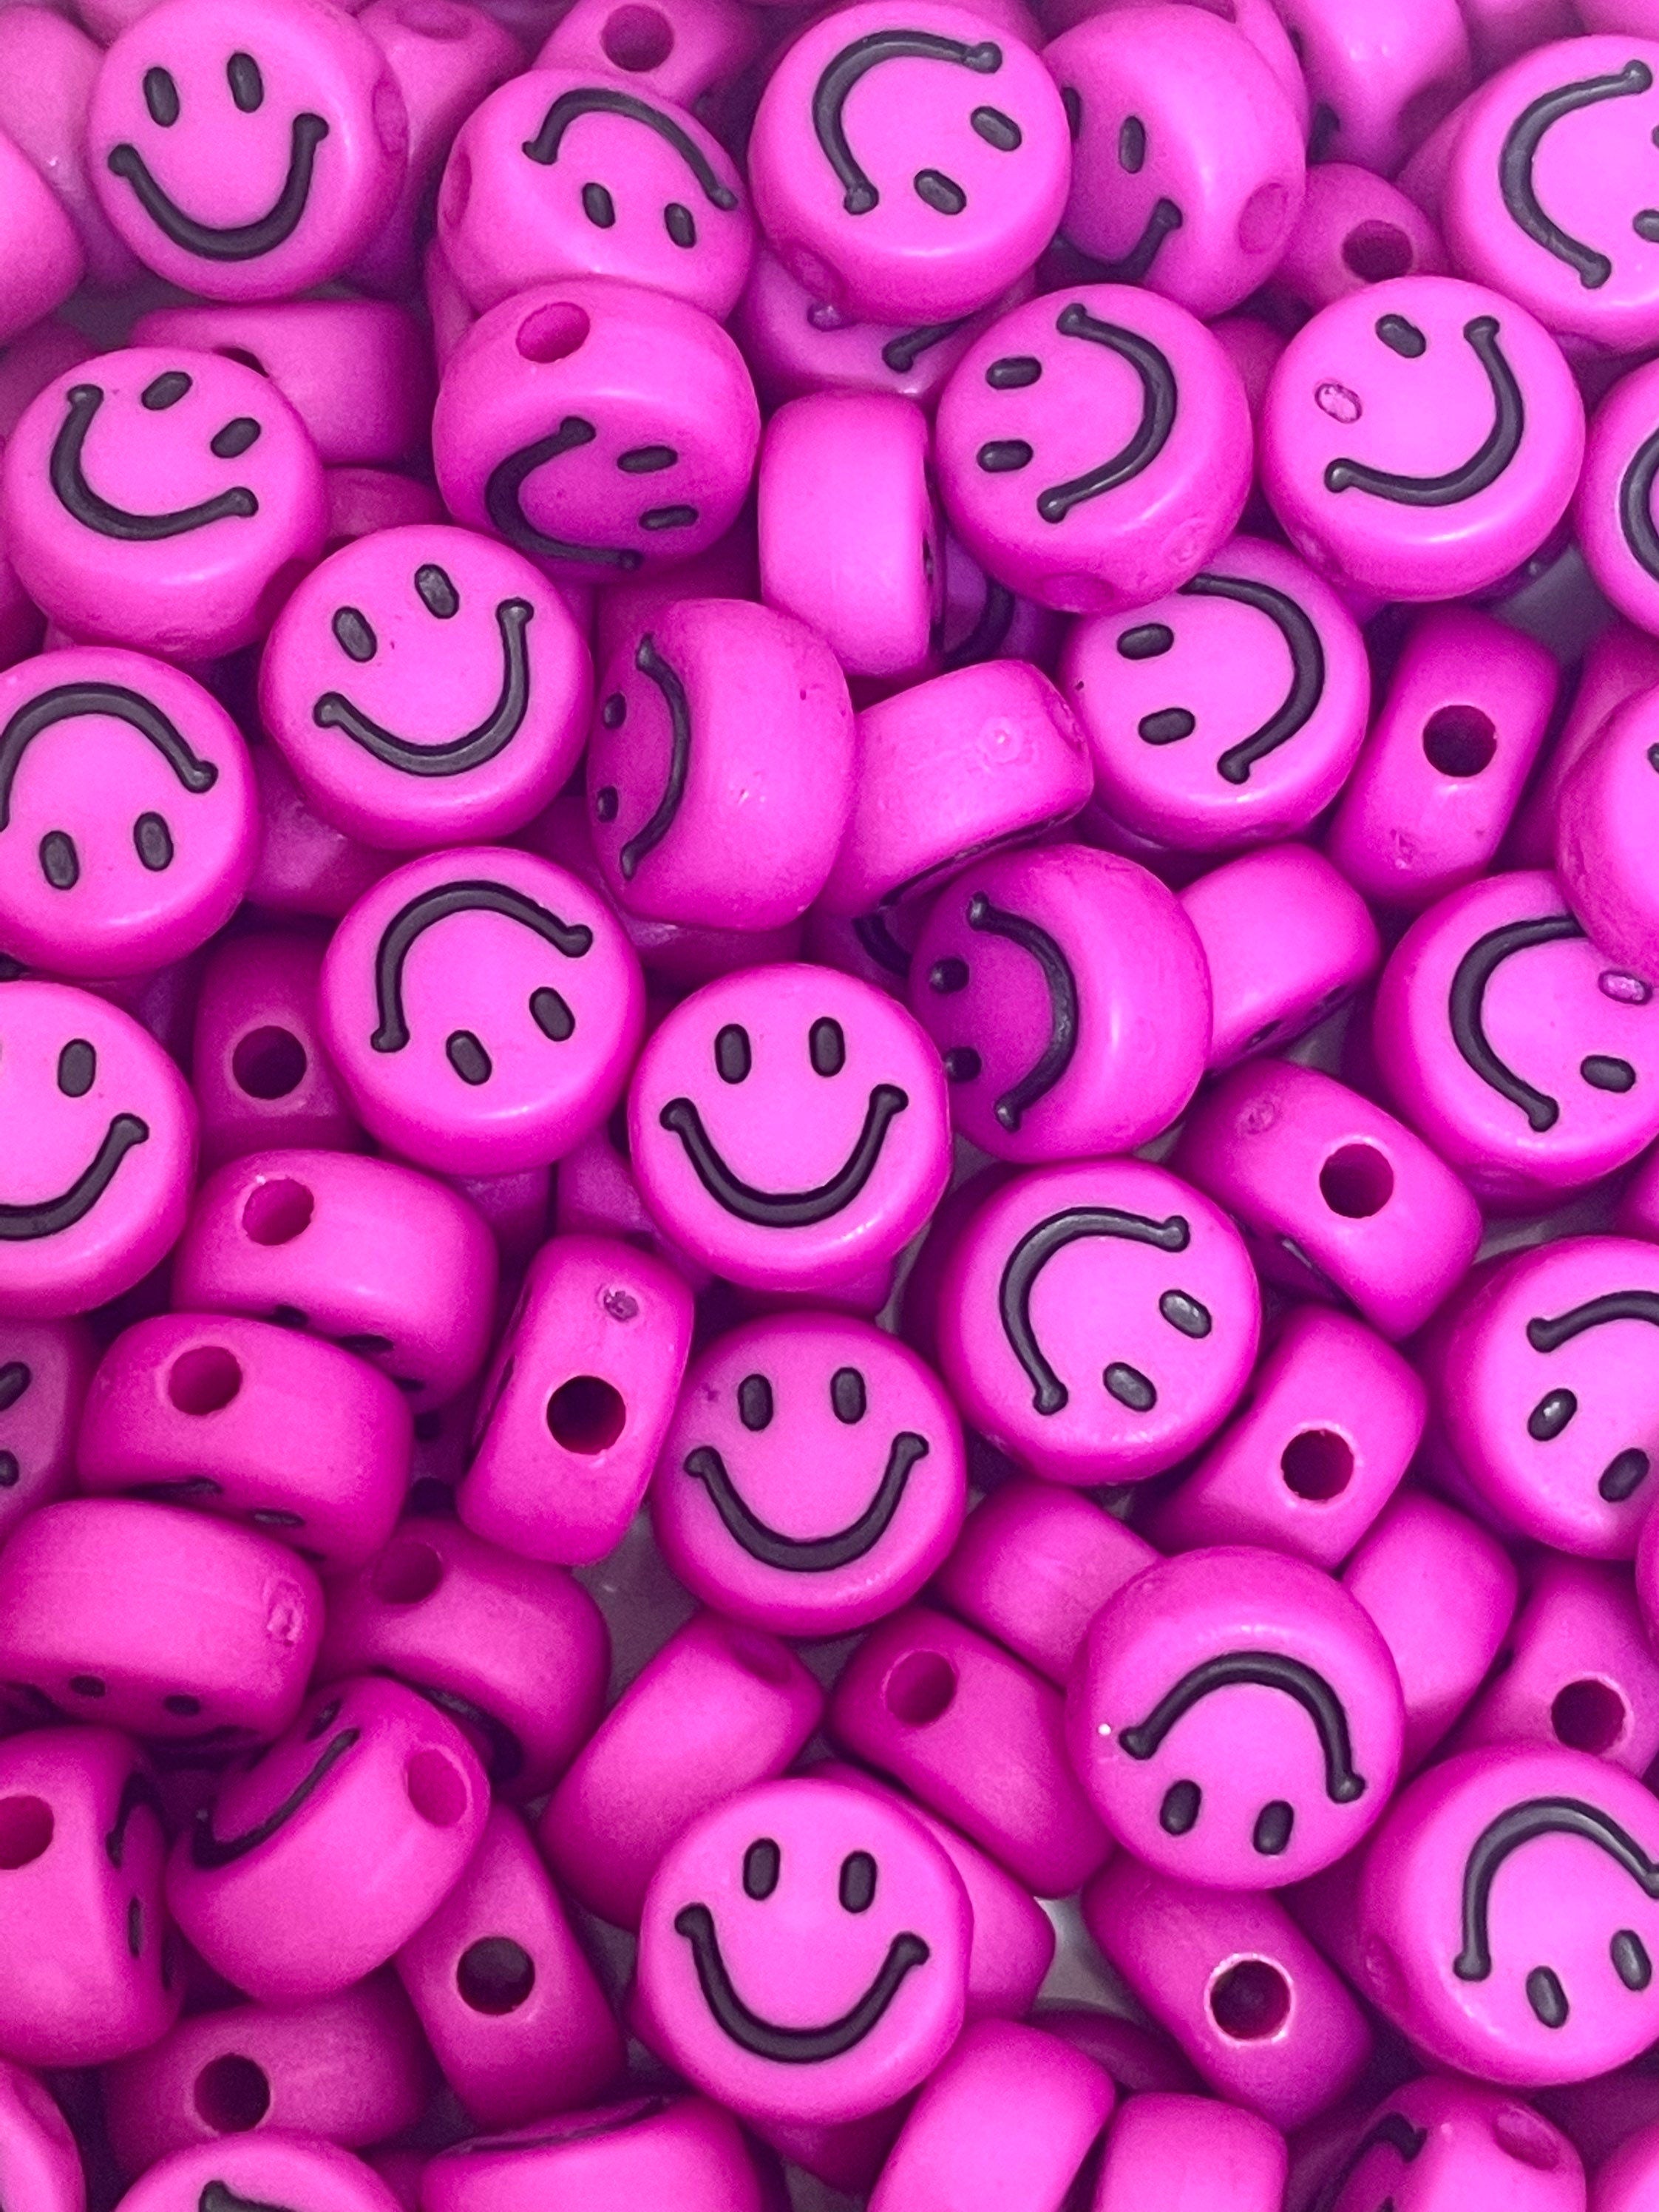 25 Pretty Pink Things That Will Make You Smile